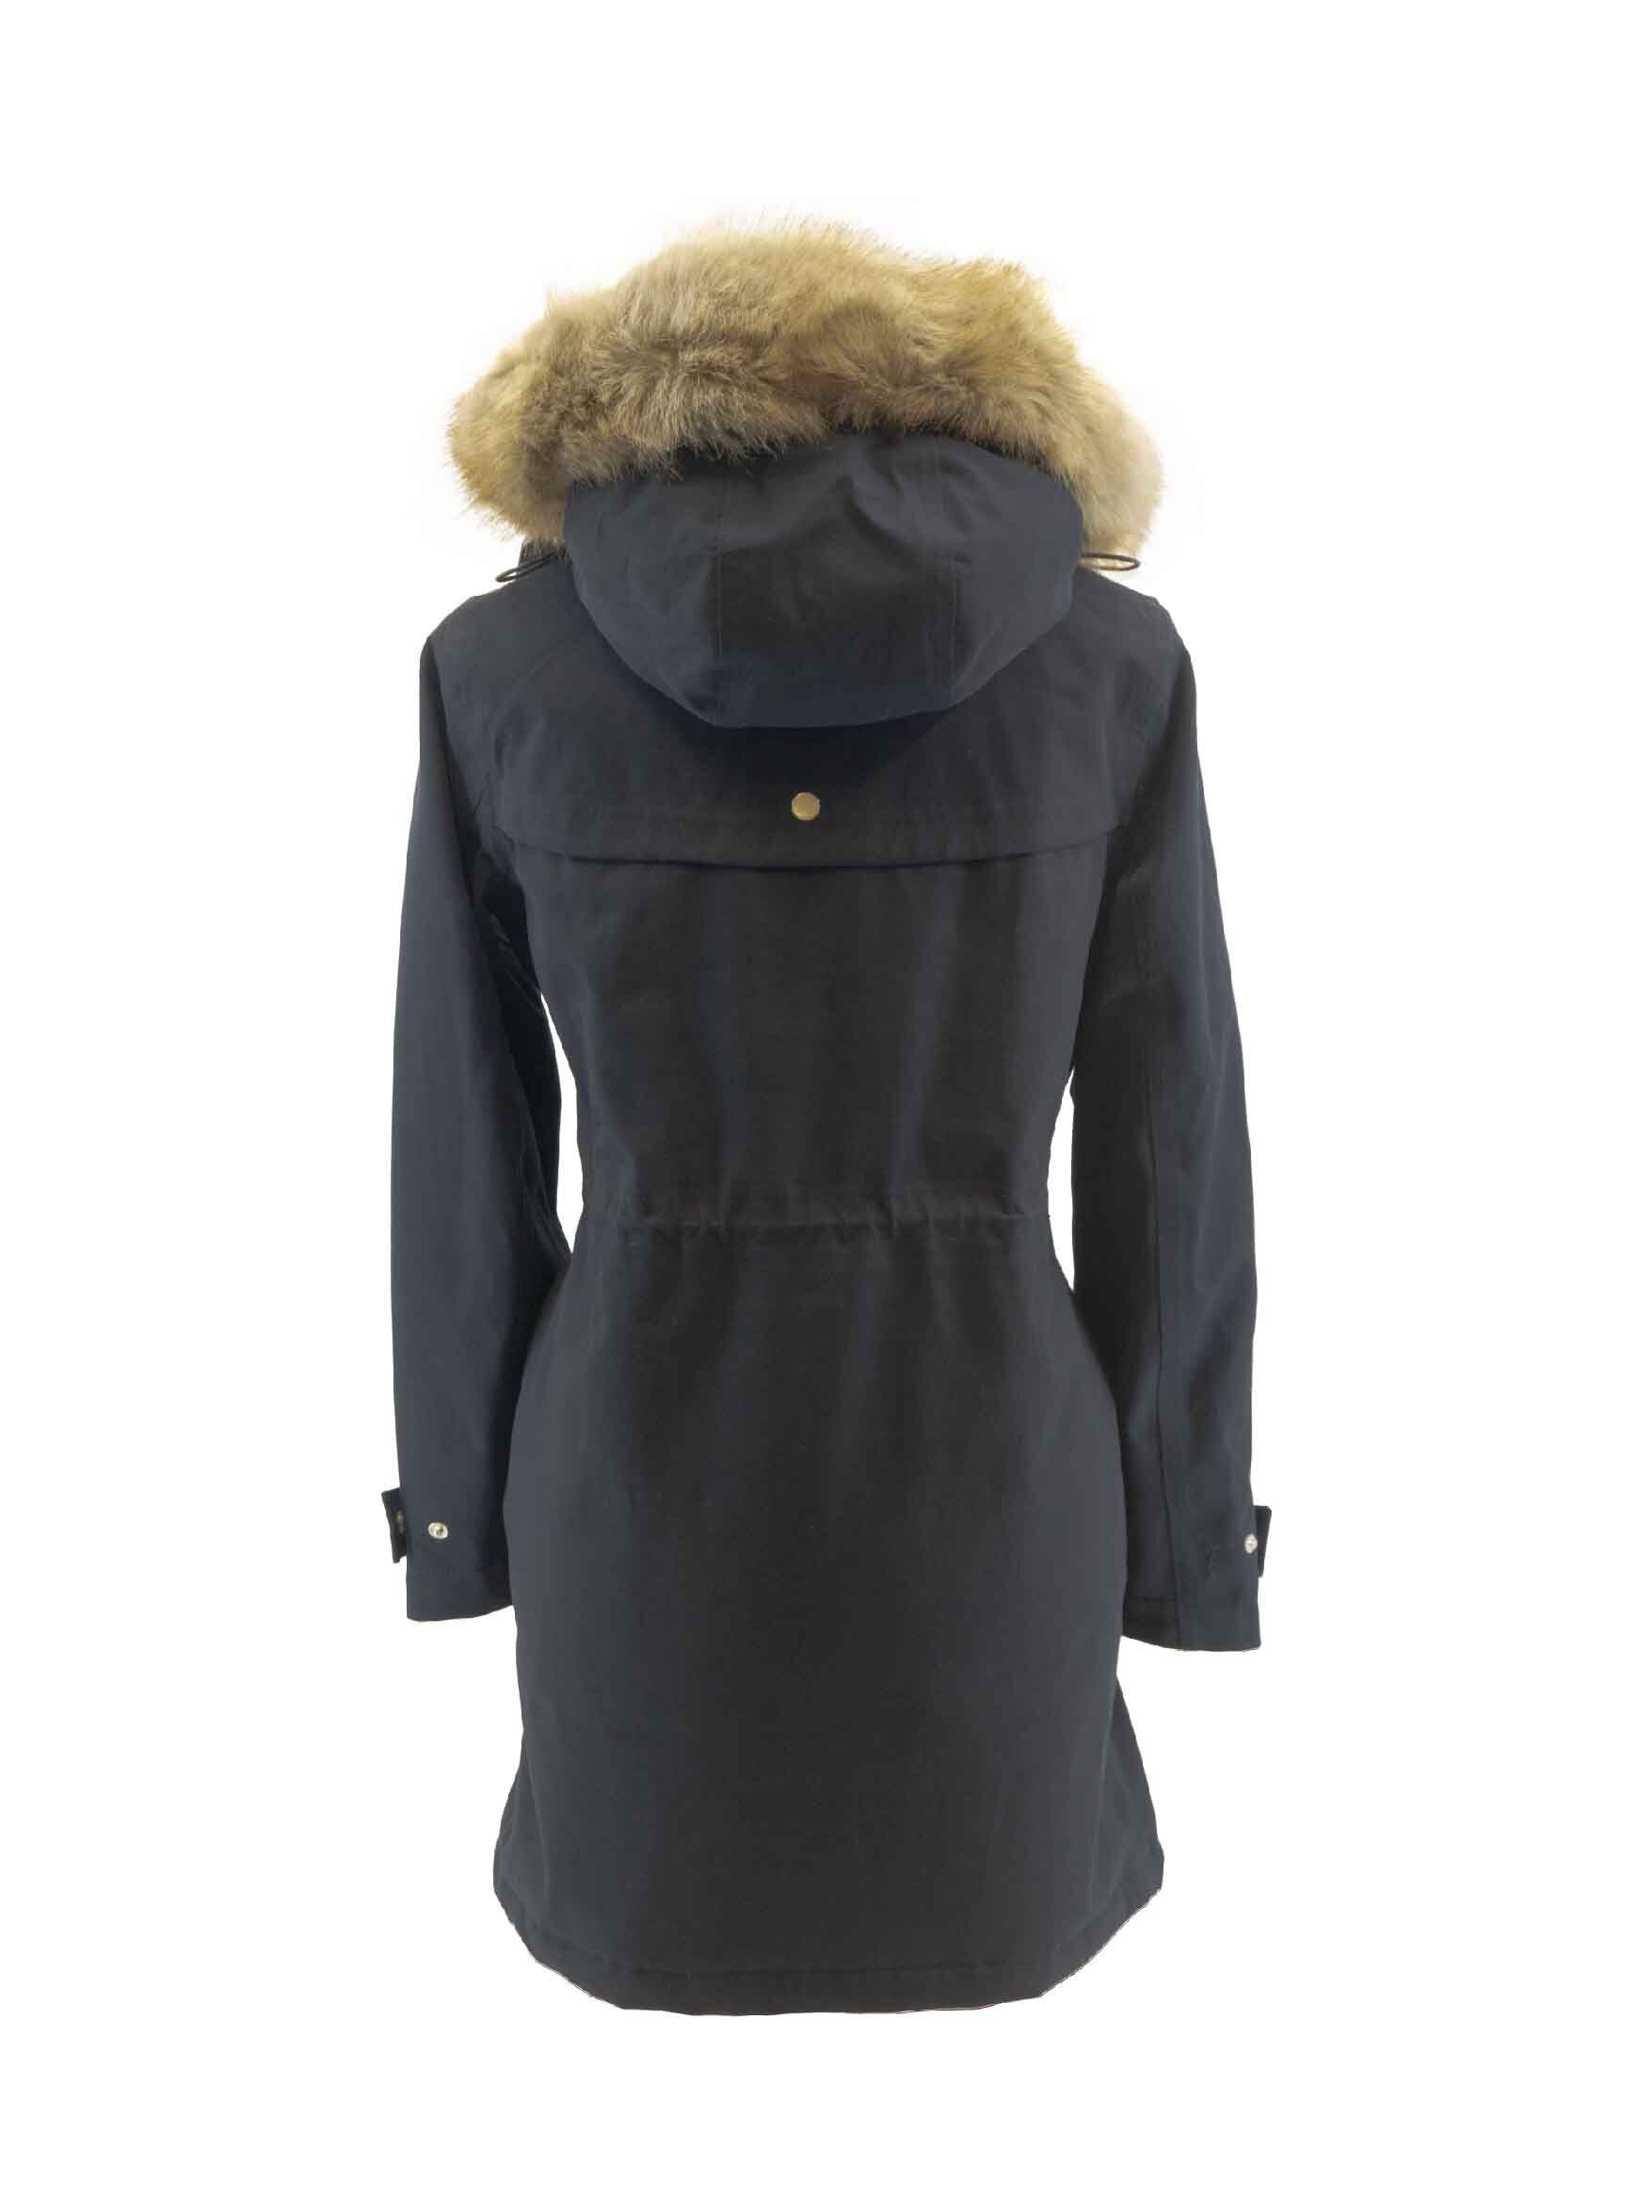 Marine Navy All Sizes Joules Aspen With Removable Hood Womens Jacket 